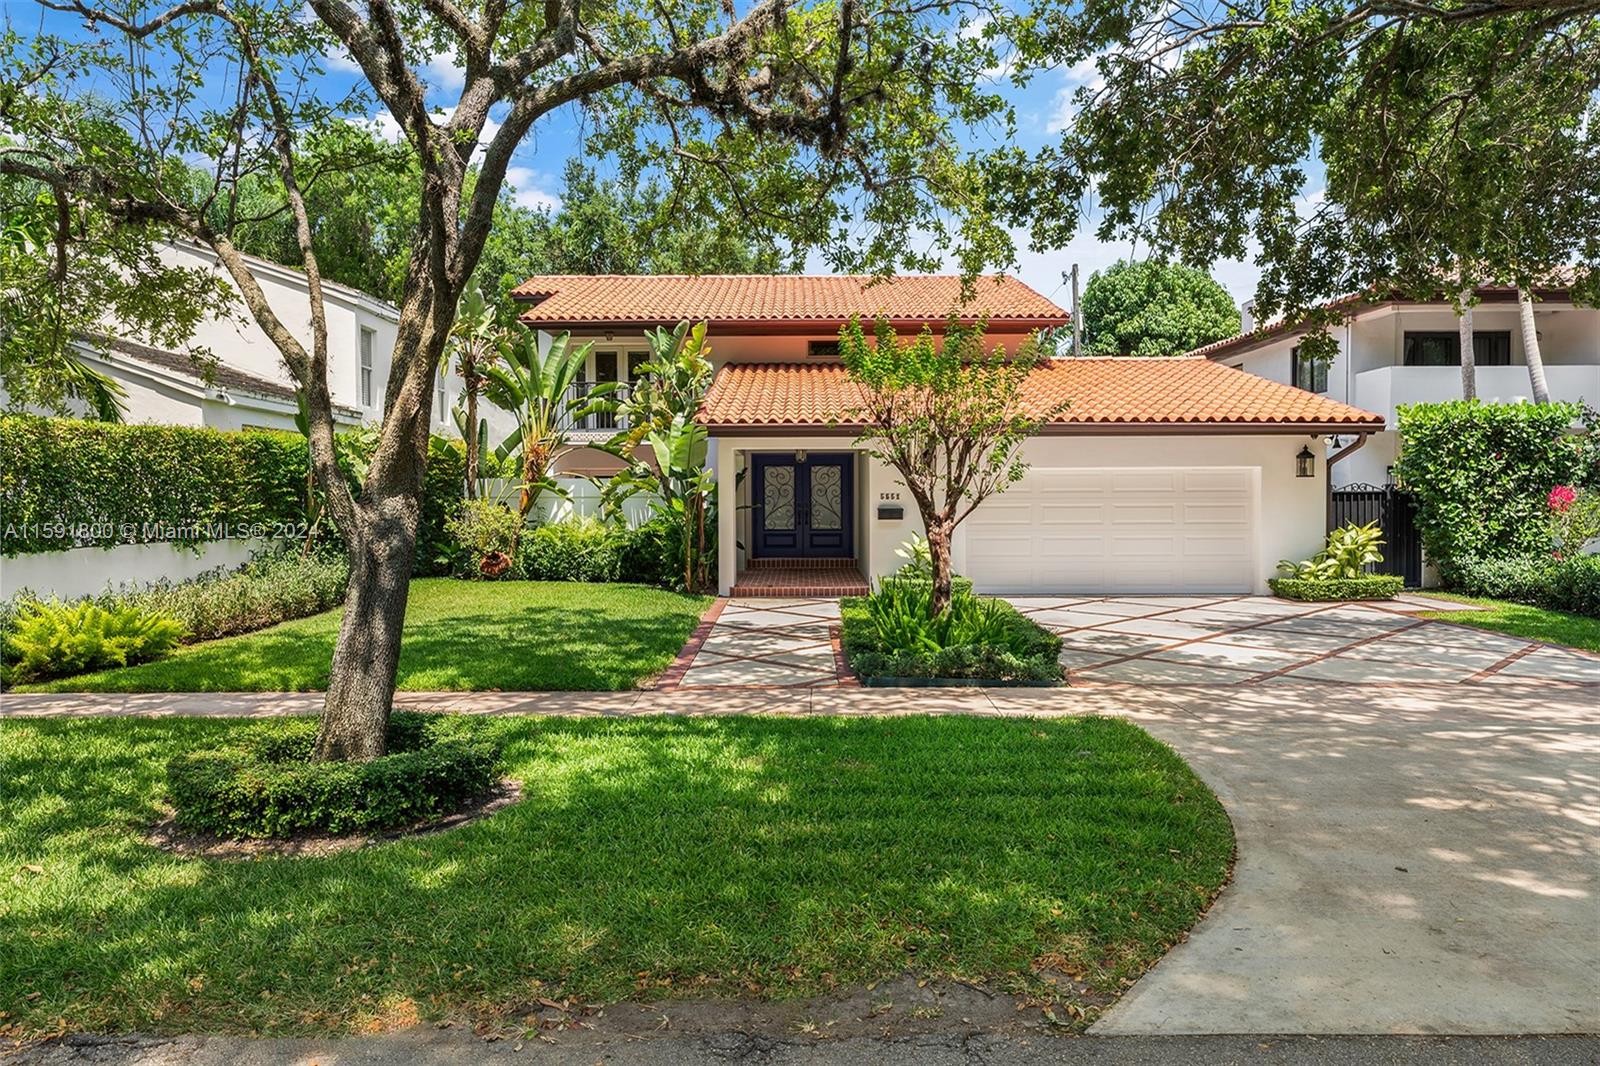 Welcome to this magnificent, fully renovated 2-story estate in South Coral Gables. Adorned with impact doors and windows, marble tile, and marble bathrms throughout. Upon entering, you are greeted by a charming living rm with its own front porch. The kitchen is fully updated with marble countertops, stainless steel appliances, and a slide-in Wolf gas range, seamlessly flowing into an elegant formal dining room. Ascending to the second floor, the master suite awaits, ft. a separate tub and shower, dual sinks, large walk-in closets, and balcony access. Additionally, there are two more bed rms that share a convenient Jack-and-Jill bathrm, also providing balcony access. Outside, enjoy the beauty of a fully blossomed Bougainvillea and a delightful area designed for relaxation or entertainment.